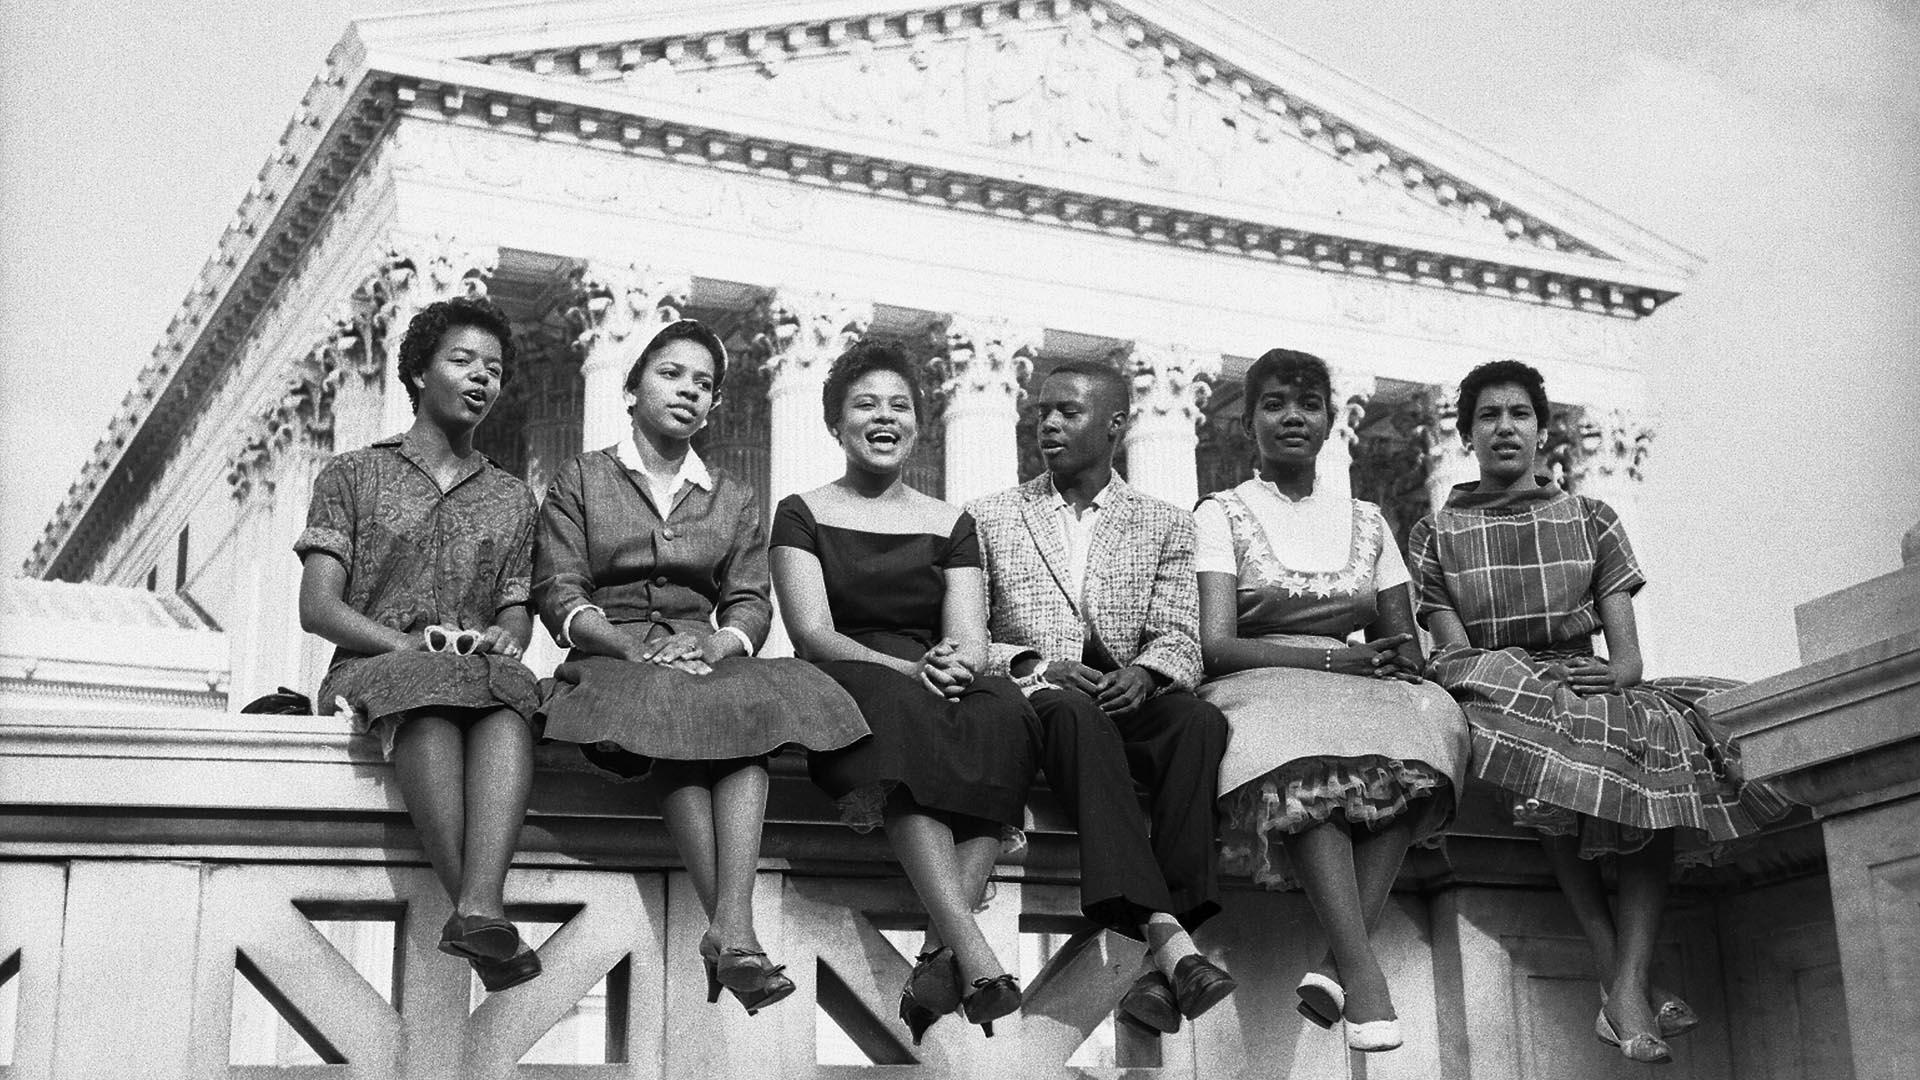 Six Black children who attended Little Rock's Central High School sit outside the Supreme Court in this 1958 photo. 从左到右:卡洛塔墙, 15, 梅尔瓦Patillo, 16, 托马斯杰佛逊, 15, 米妮·简·布朗, 16, 格洛丽亚雷, 15, 伊丽莎白·埃德克福德, 16. 图片来源:Getty Images